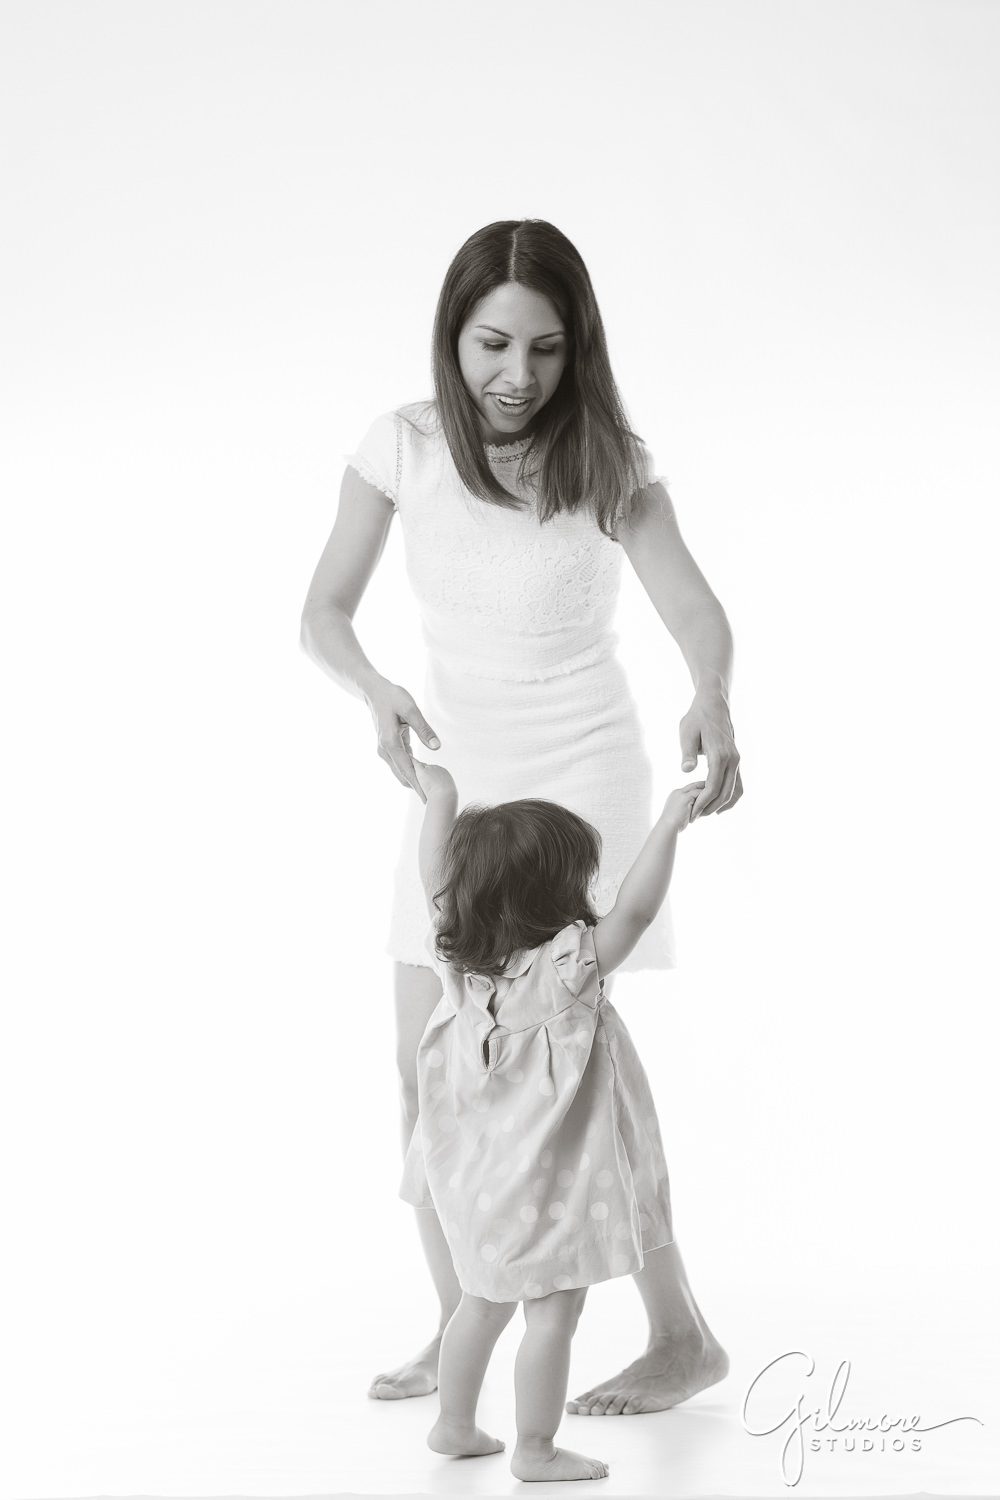 Mommy and Me Photo Session in Orange County, dancing with mom, cute session idea